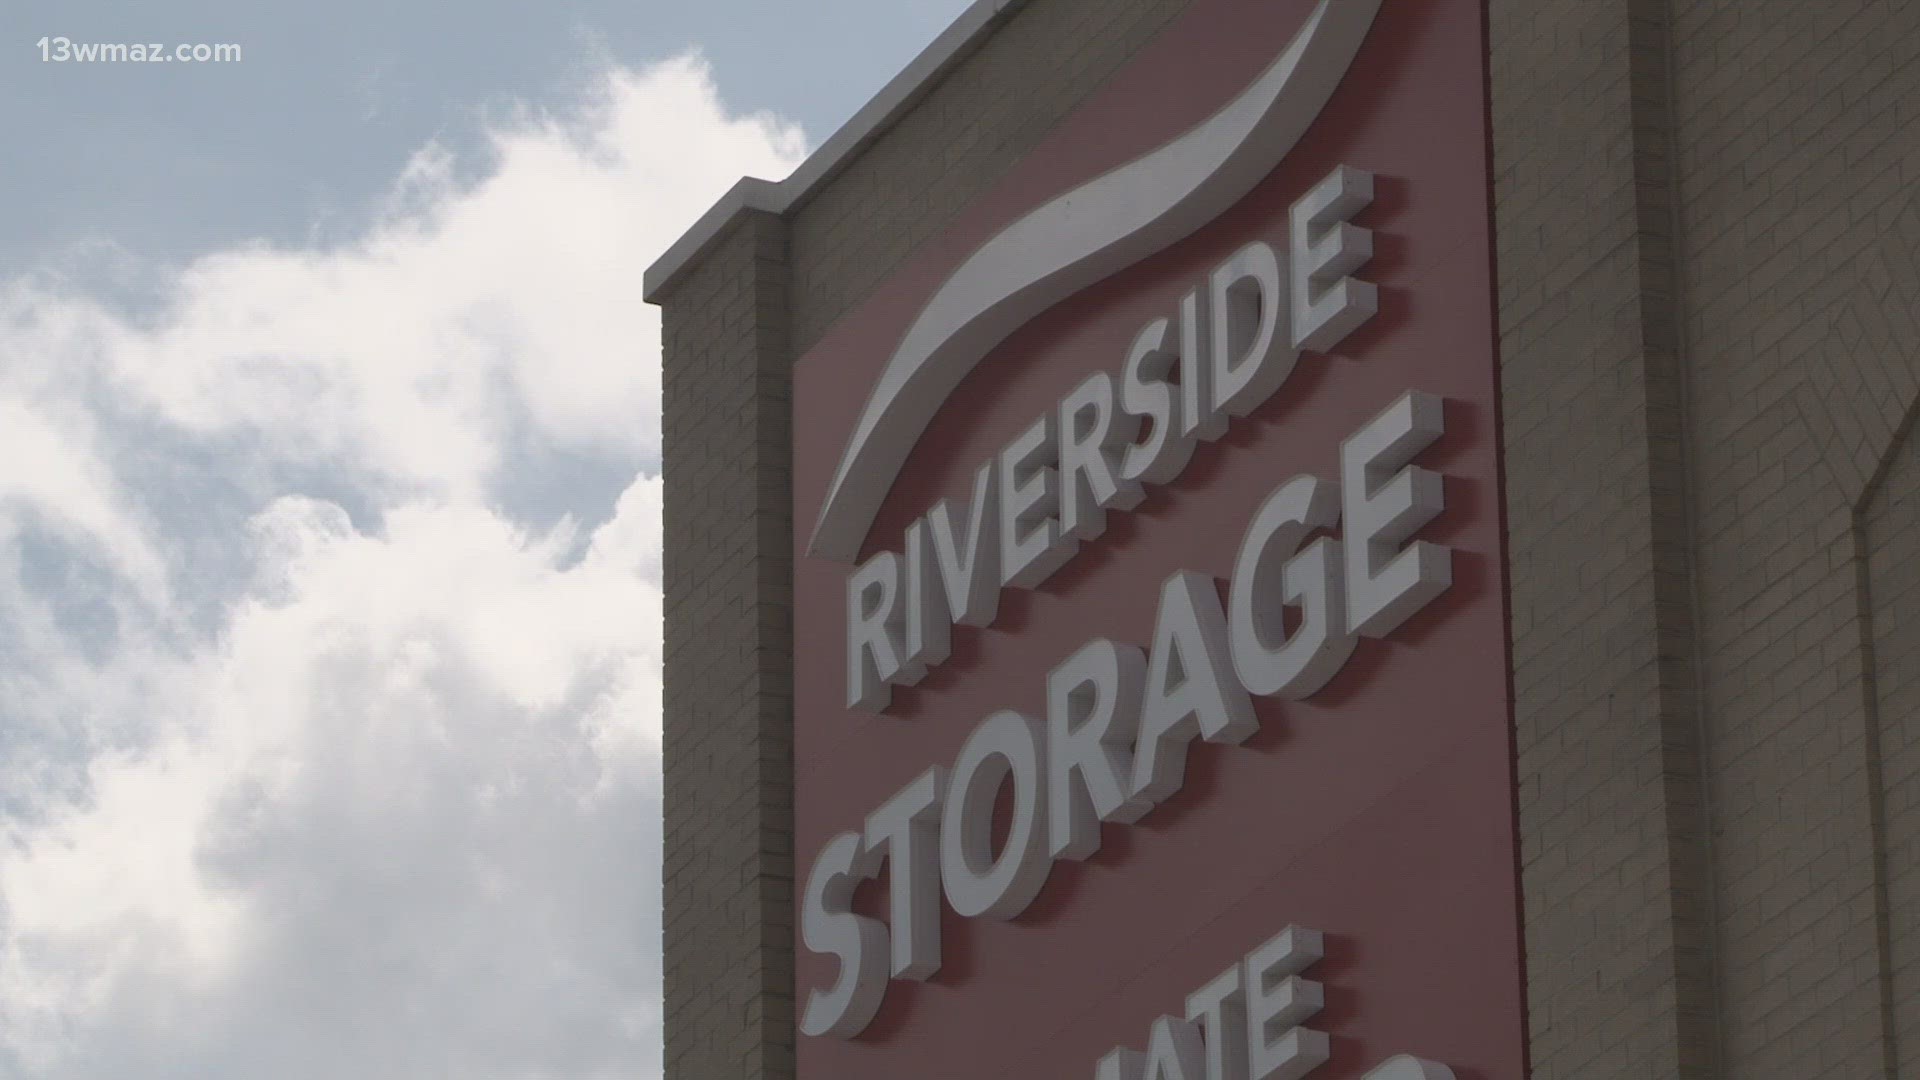 The building has sat vacant until Thursday when Riverside Storage opened a new facility inside the paper's old distribution center.